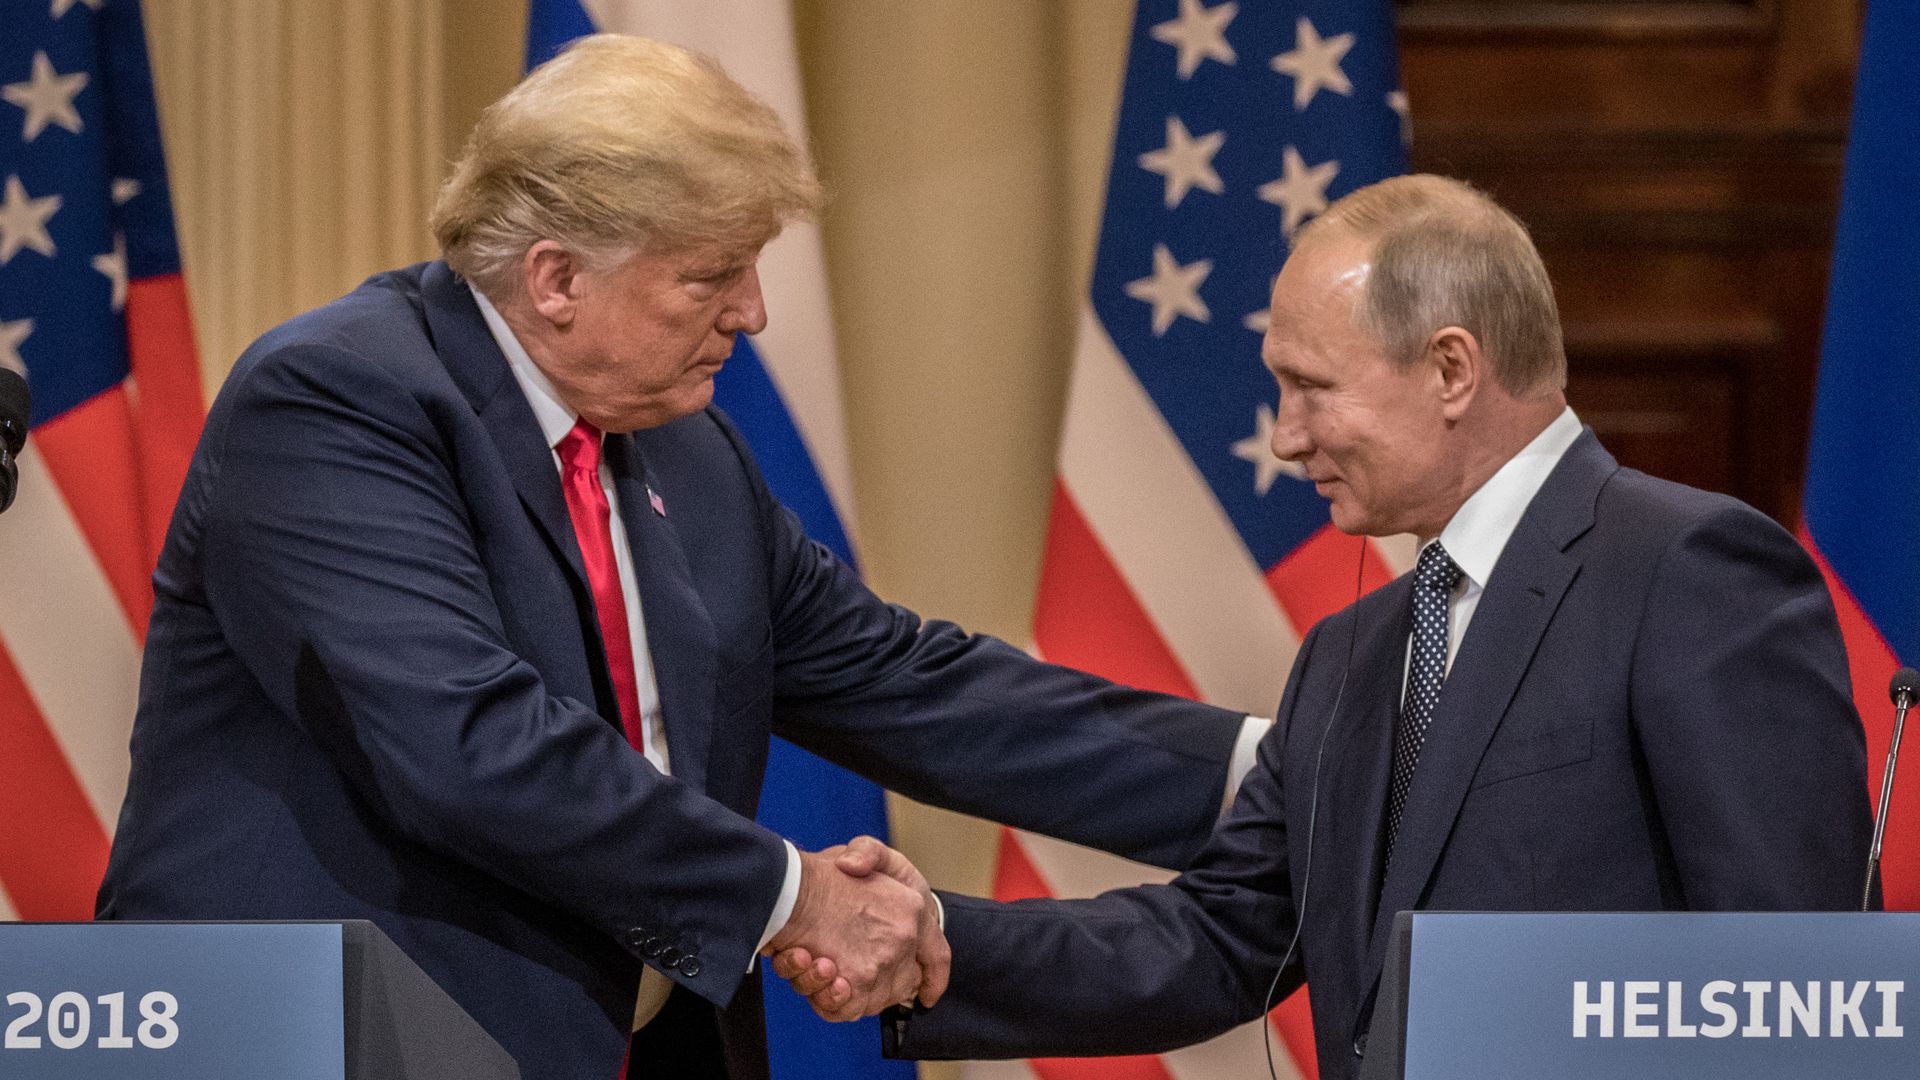 Trump and Putin smile and shake hands behind podiums in Helsinki